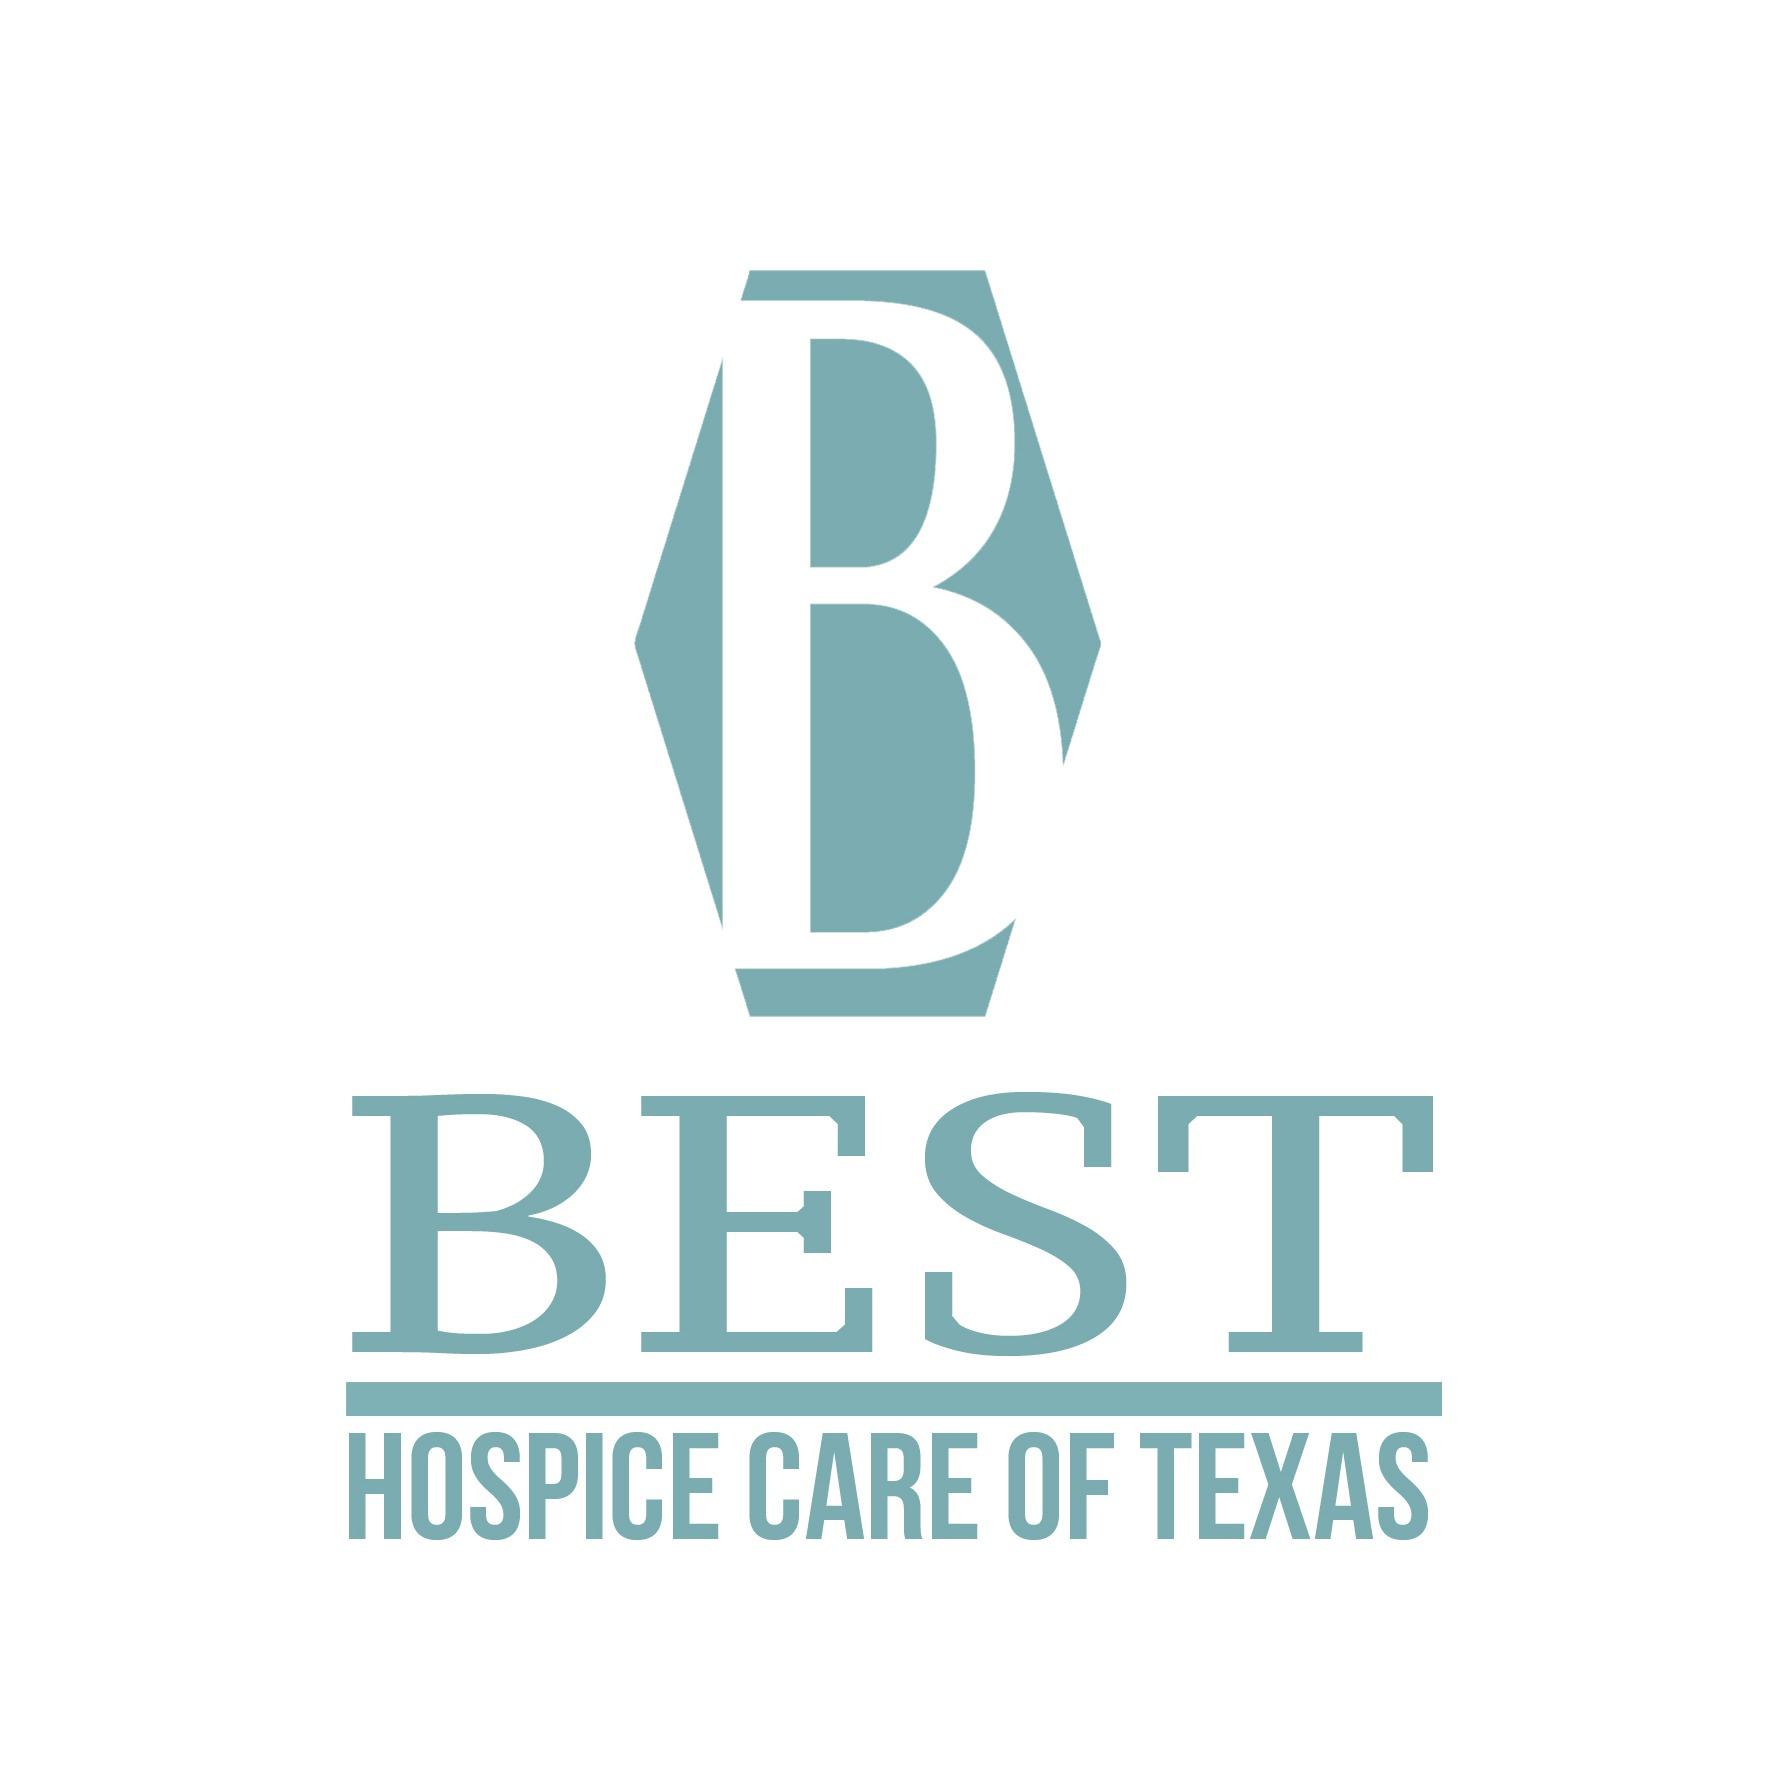 Best Hospice Care Of Texas - Beaumont, TX 77702 - (409)356-9271 | ShowMeLocal.com